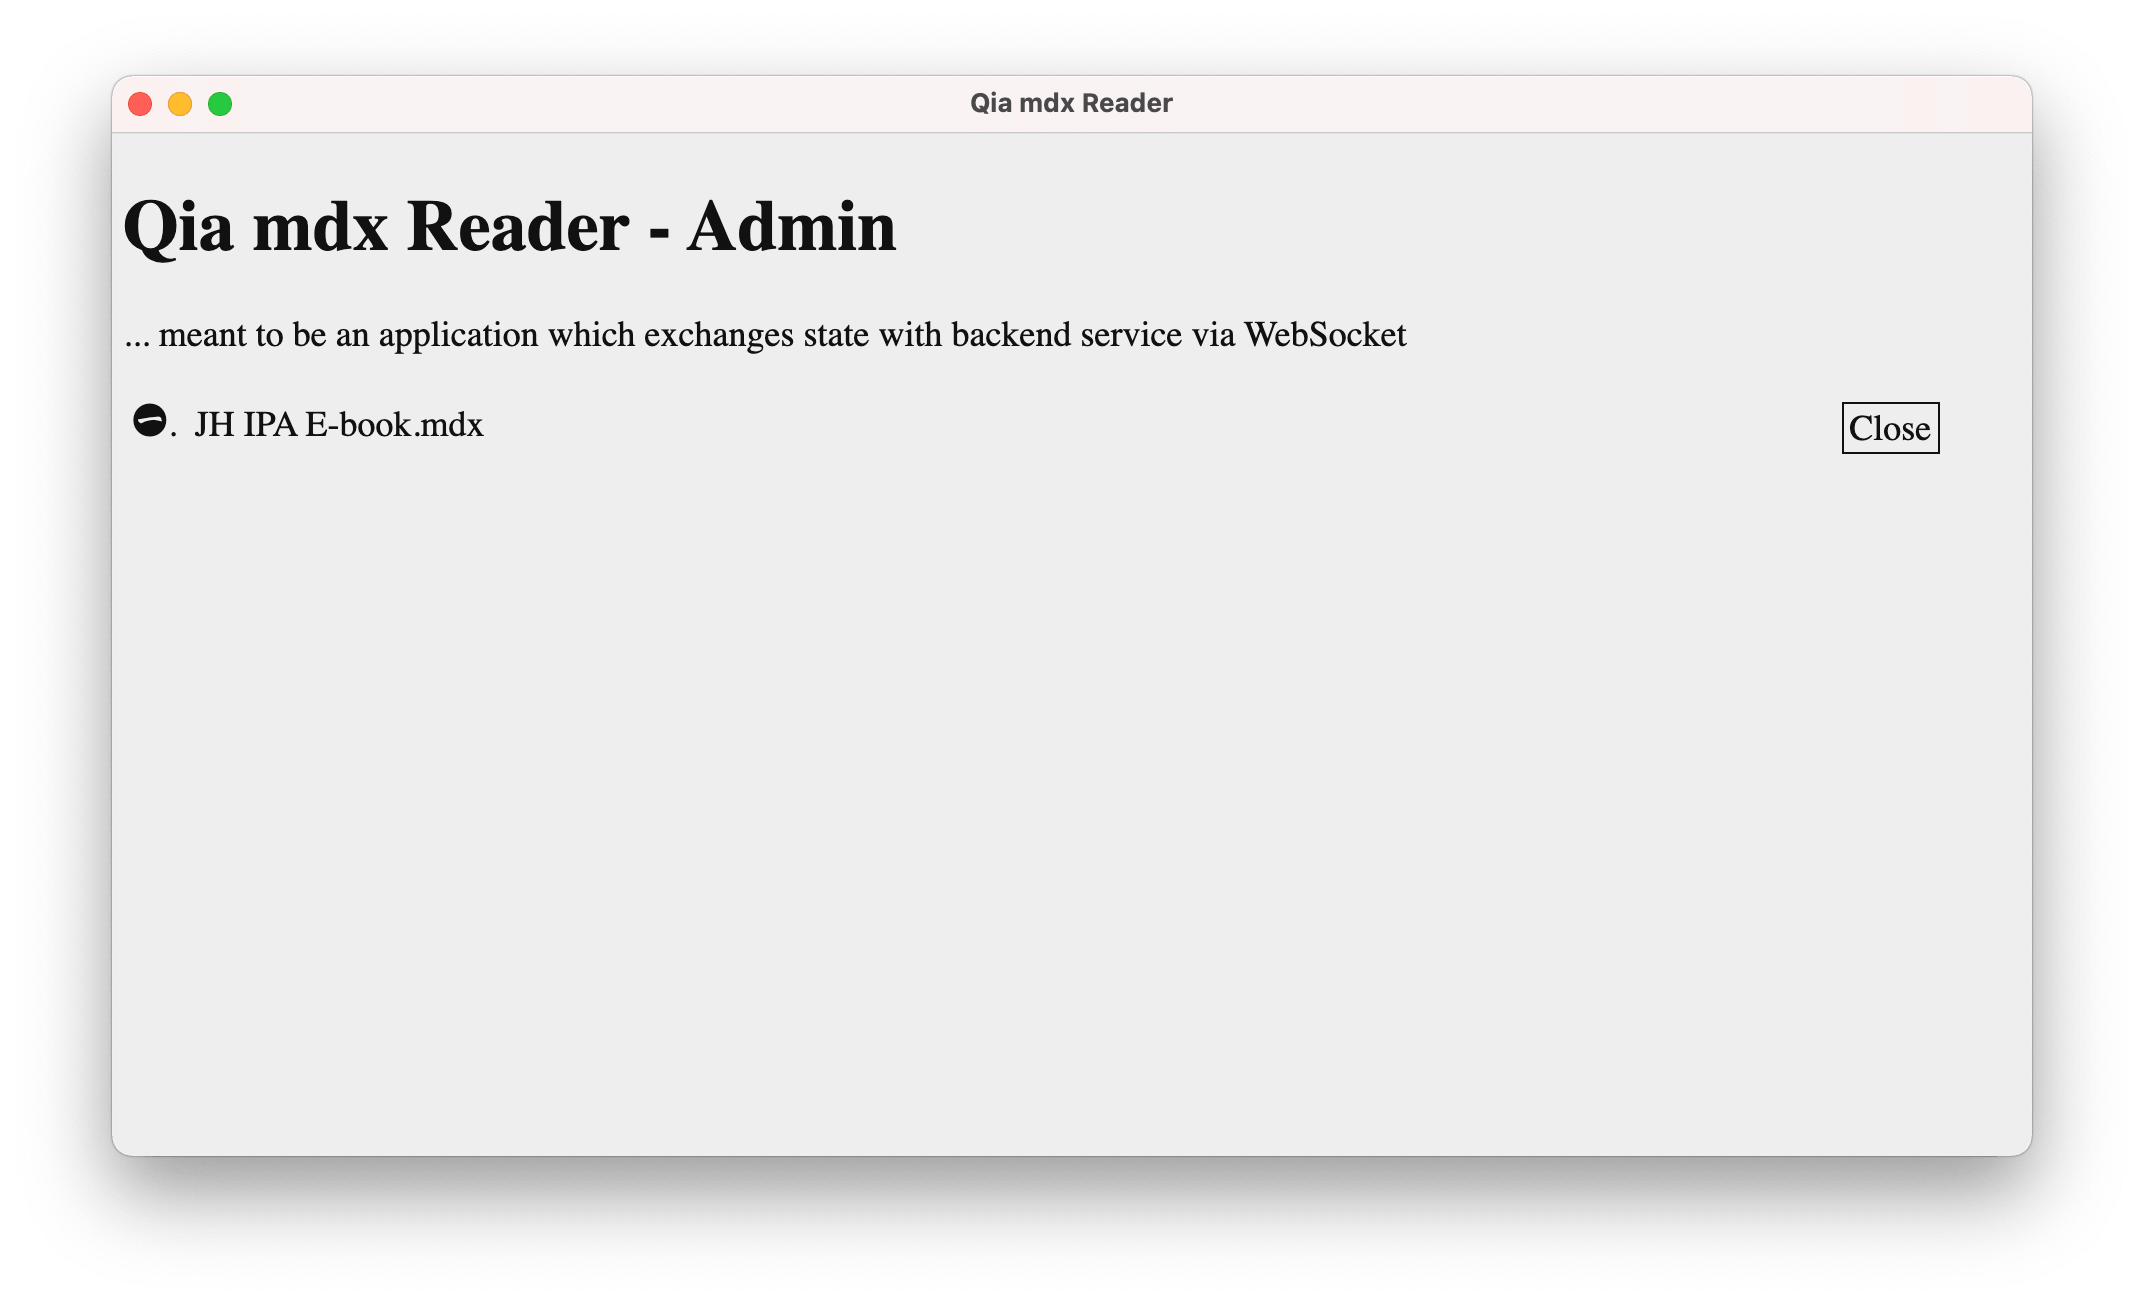 Qia mdx Reader - Launcher, in Light Theme, on macOS